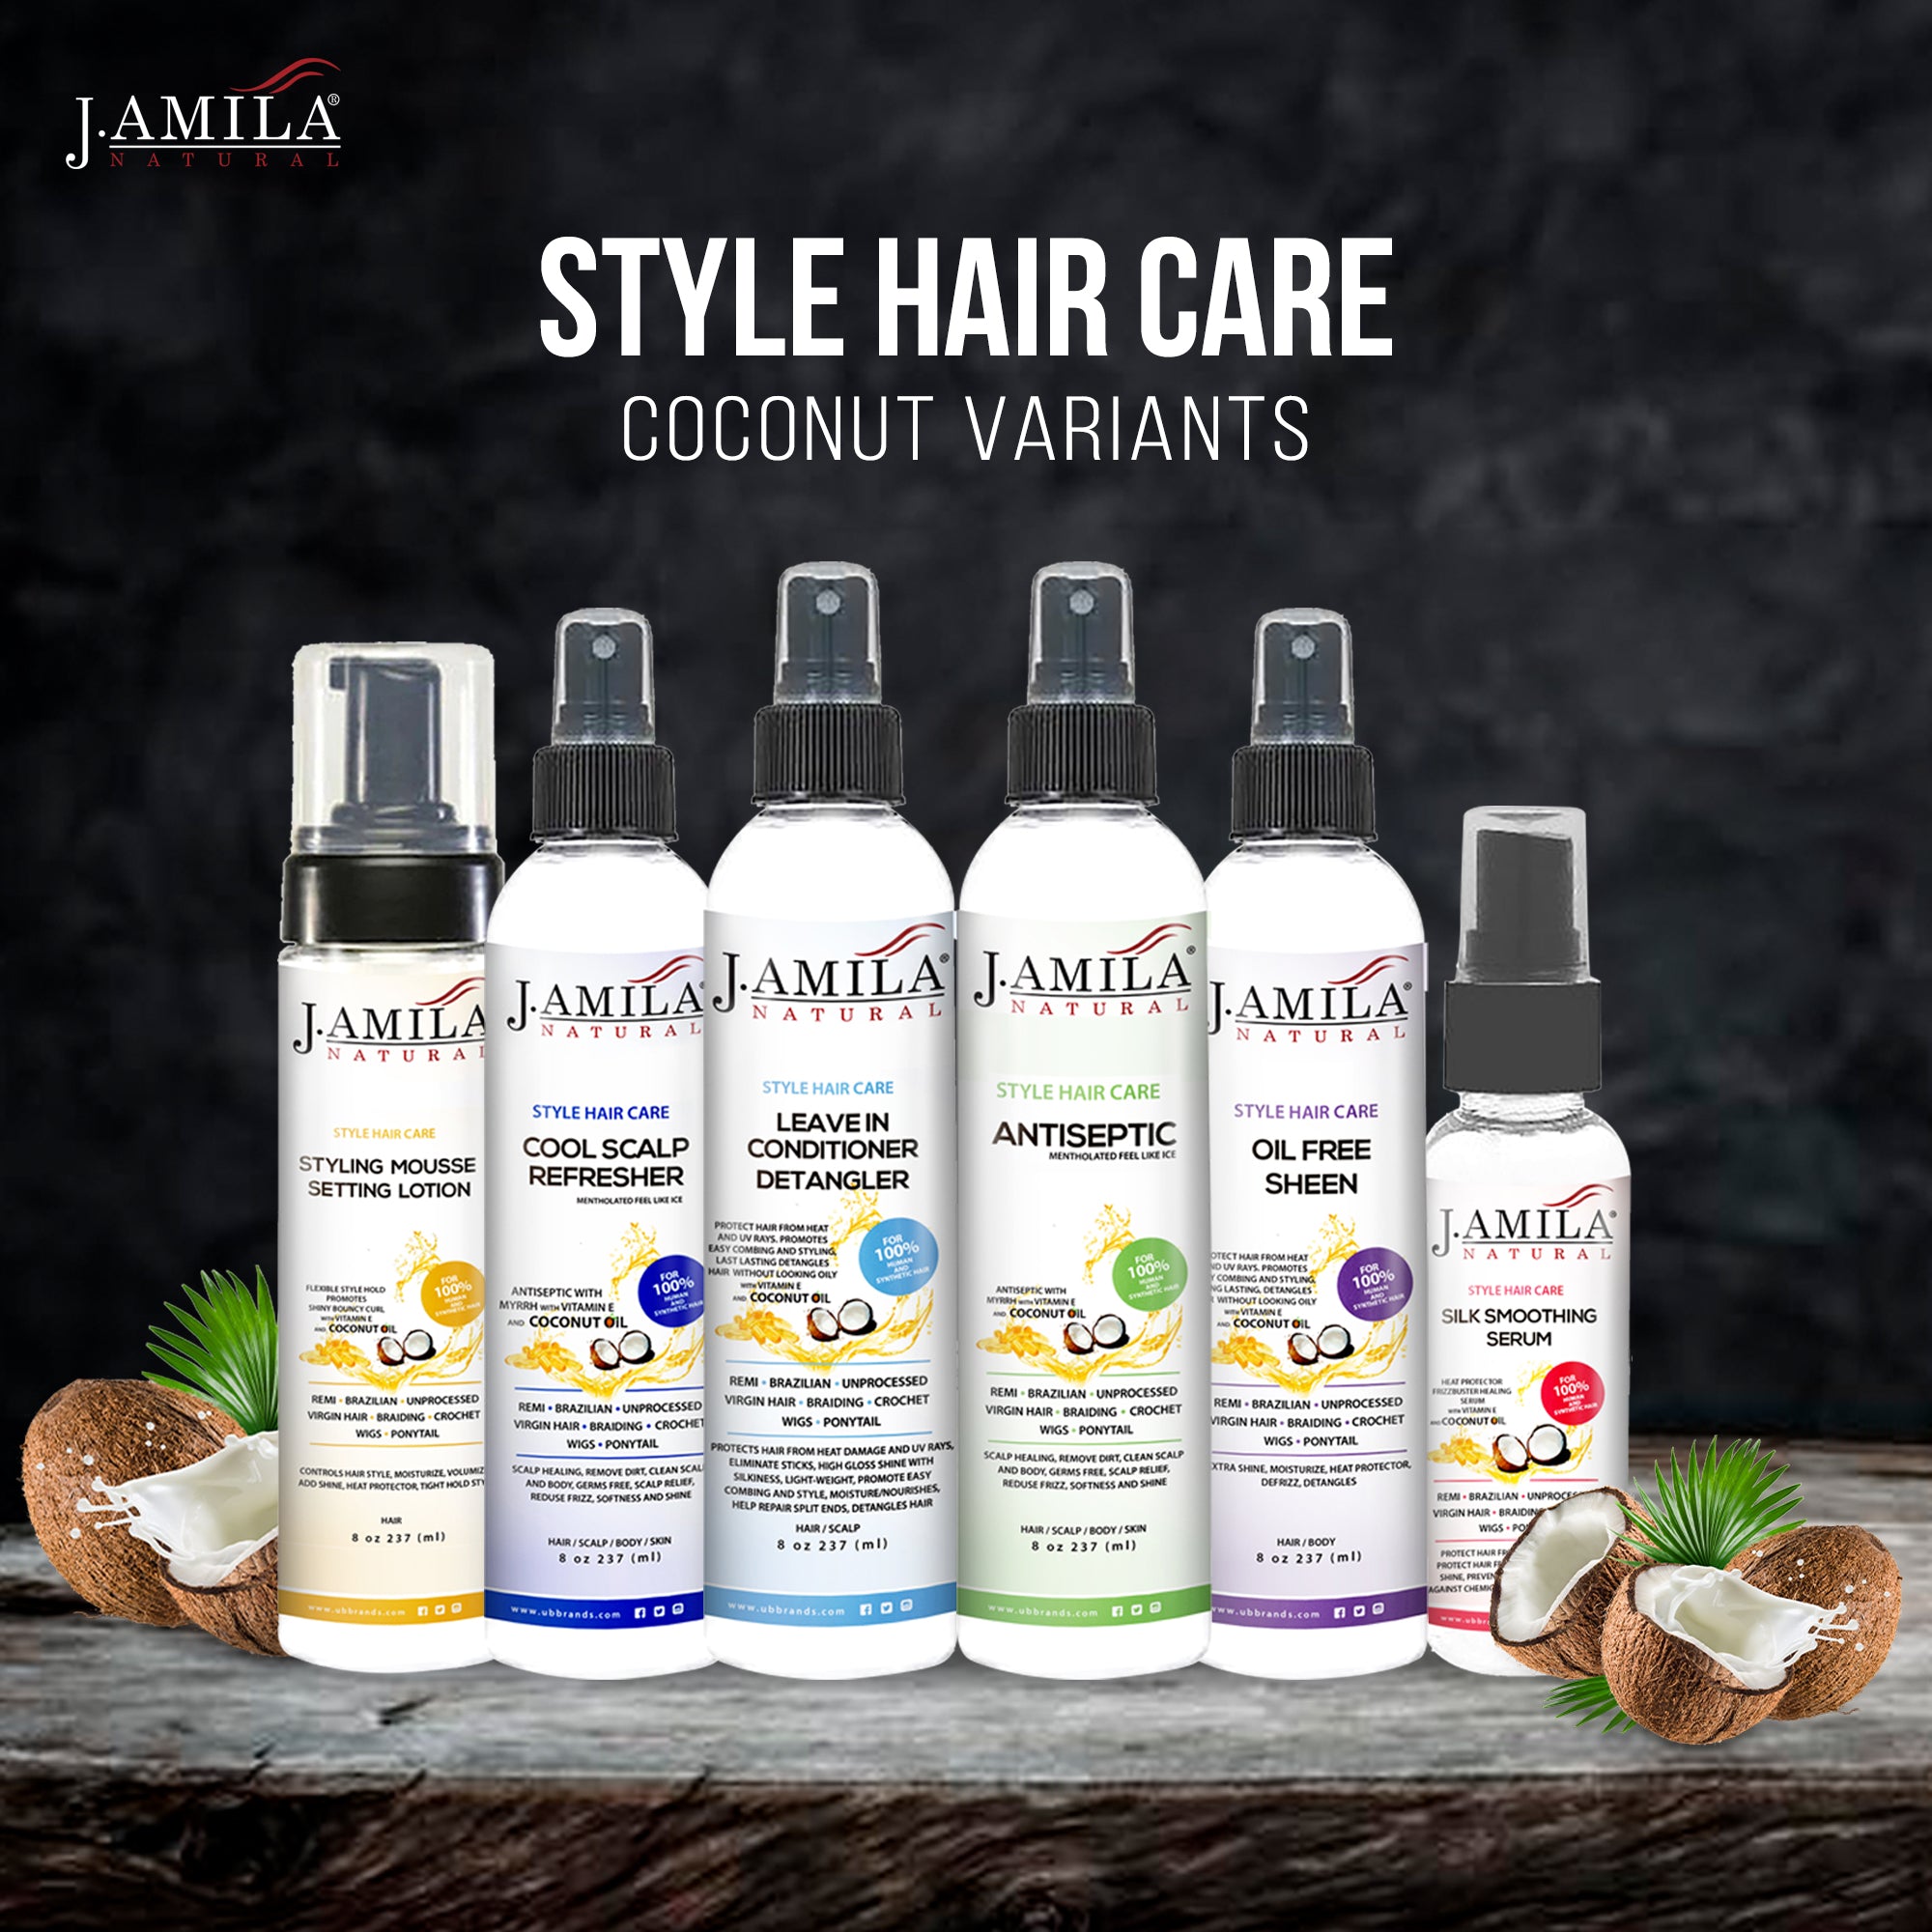 J. AMILA Natural Coconut Oil 6-in-1 Hair Care Pack (Setting Lotion, Cool Scalp, Leave-in Conditioner, Antiseptic, Oil-free Sheen, Silk Smoothing Serum)